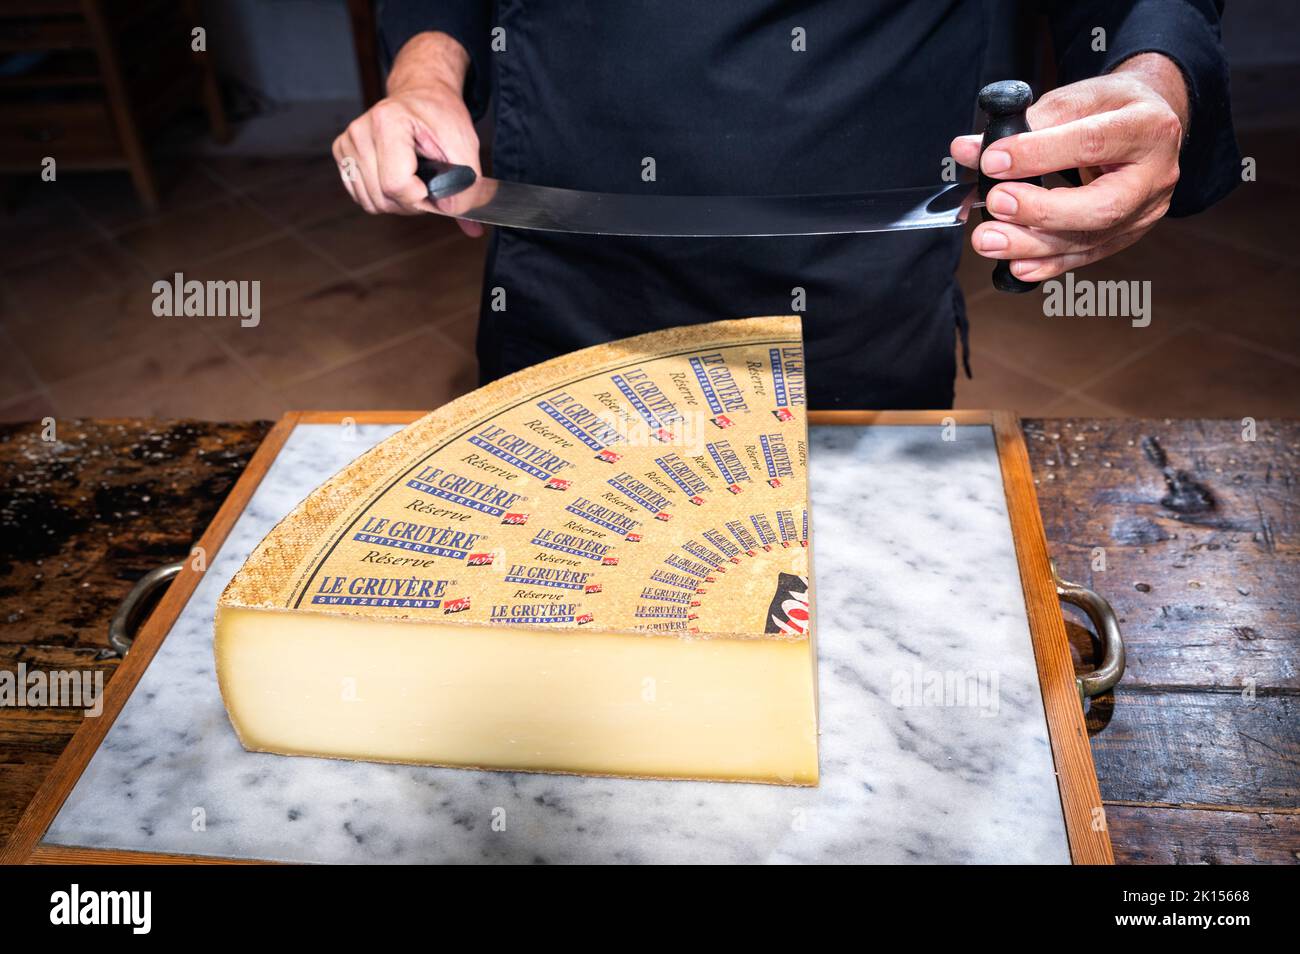 July 11 2022, Lyon, France : A man cuts a portion of The Gruyère with a wire, the famous swiss cheese in a cellar on a marbble background Stock Photo